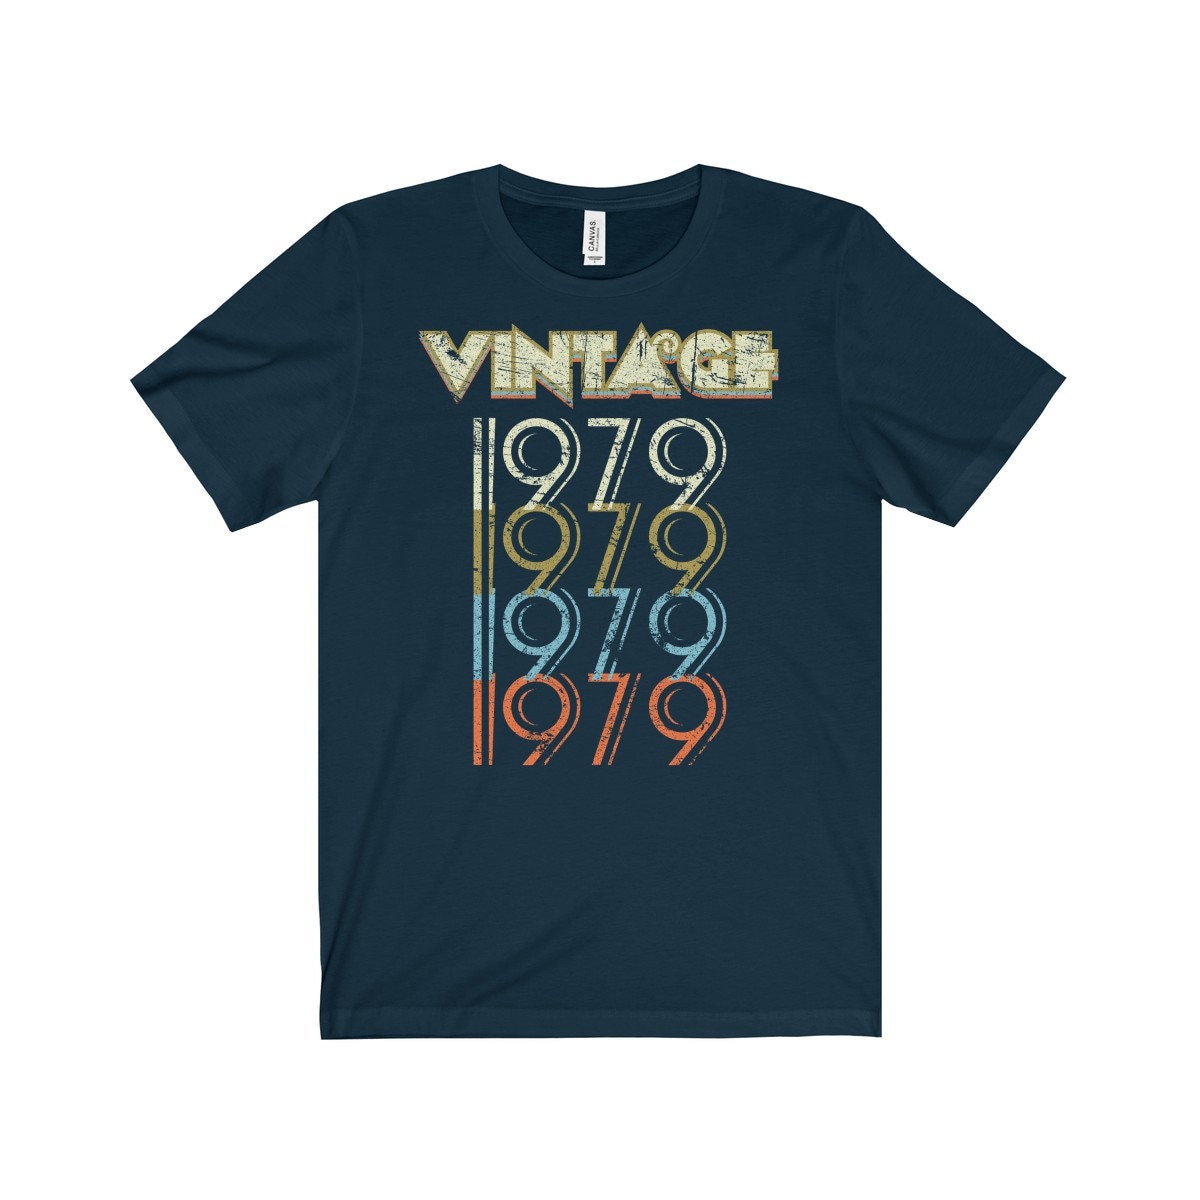 43rd Birthday Gift, 1979 T Shirt in Retro & Vintage 70s style for Men or Women Unisex Jersey Short Sleeve Tee Shirt Top